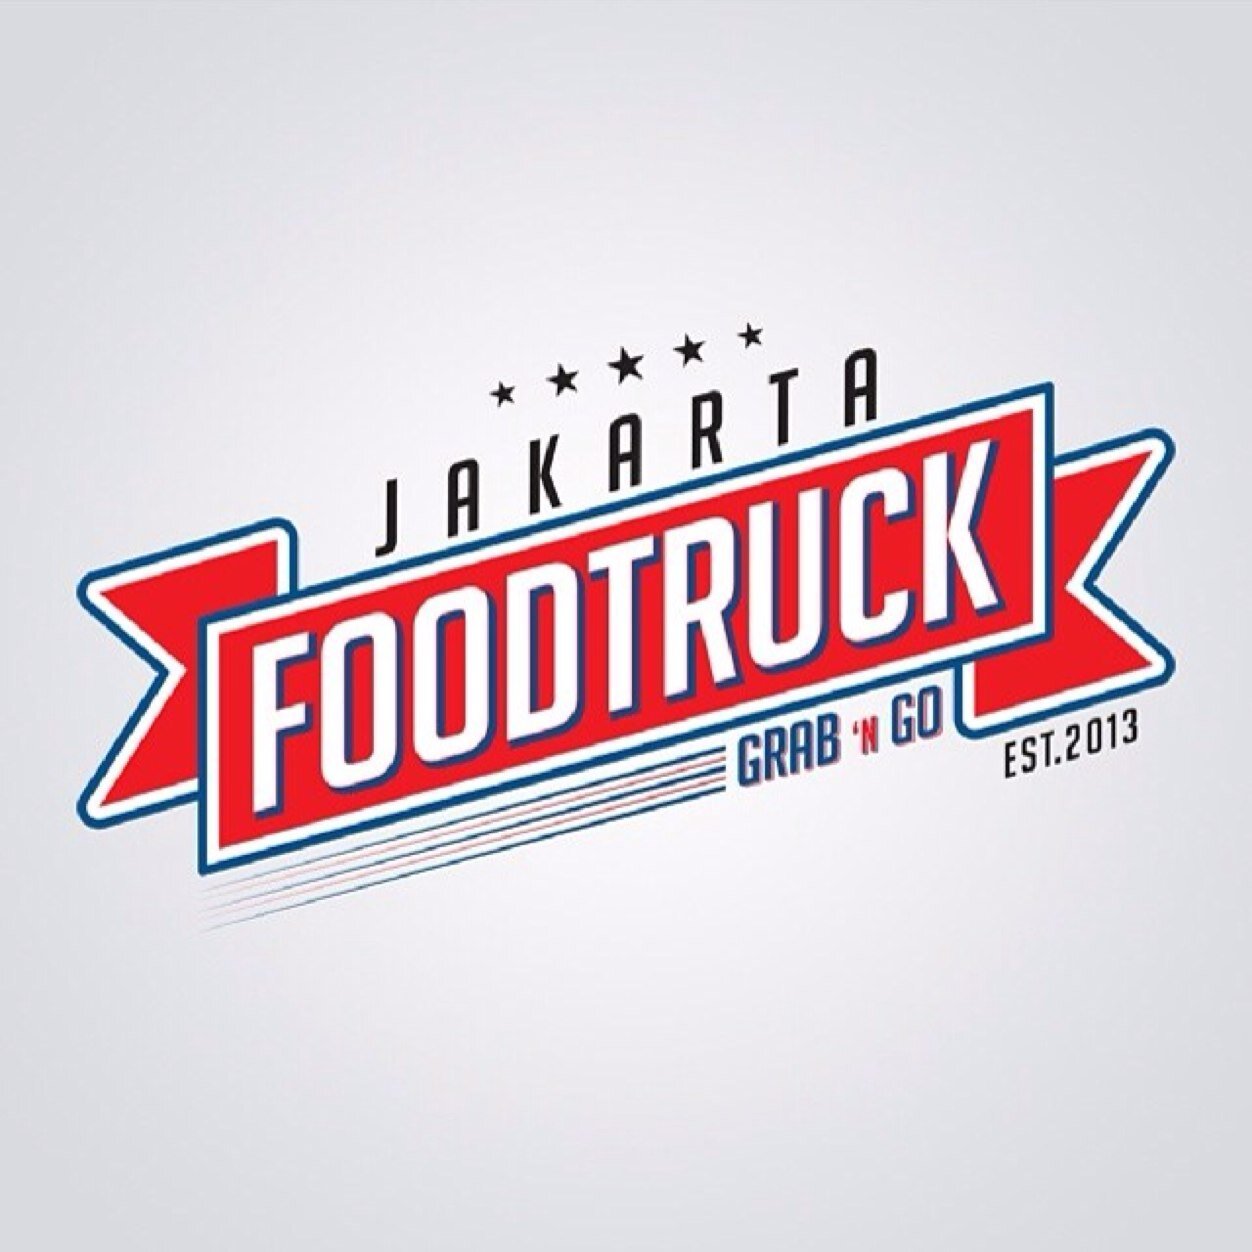 JKTfoodtruck: A new way to dine in town!Catch us every day. follow our IG: jktfoodtruck FB:jakartafoodtruck email: jftfoodtruck@gmail.com or text:082145914519